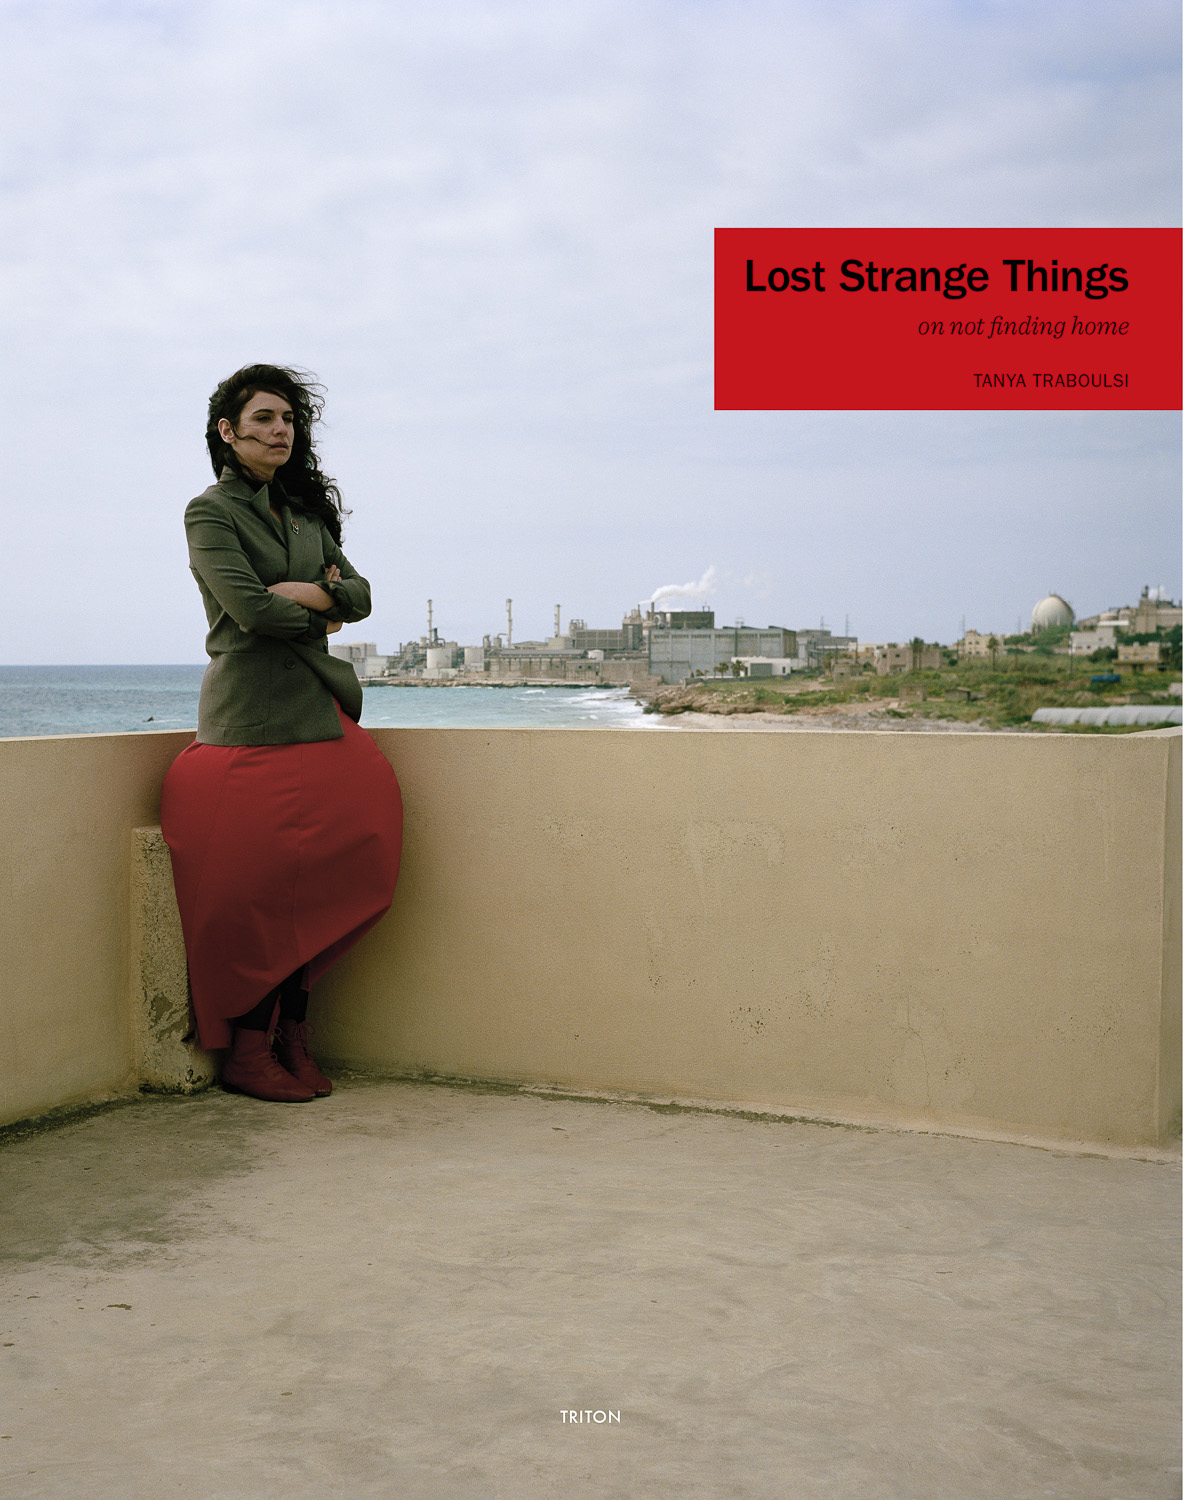   Lost Strange Things: On not finding home  Book   Lost Strange Things: On not finding home  is a monograph with images from the photographic series of the same title.&nbsp;The book assembles 116 photographs, many family photos and documents culled f